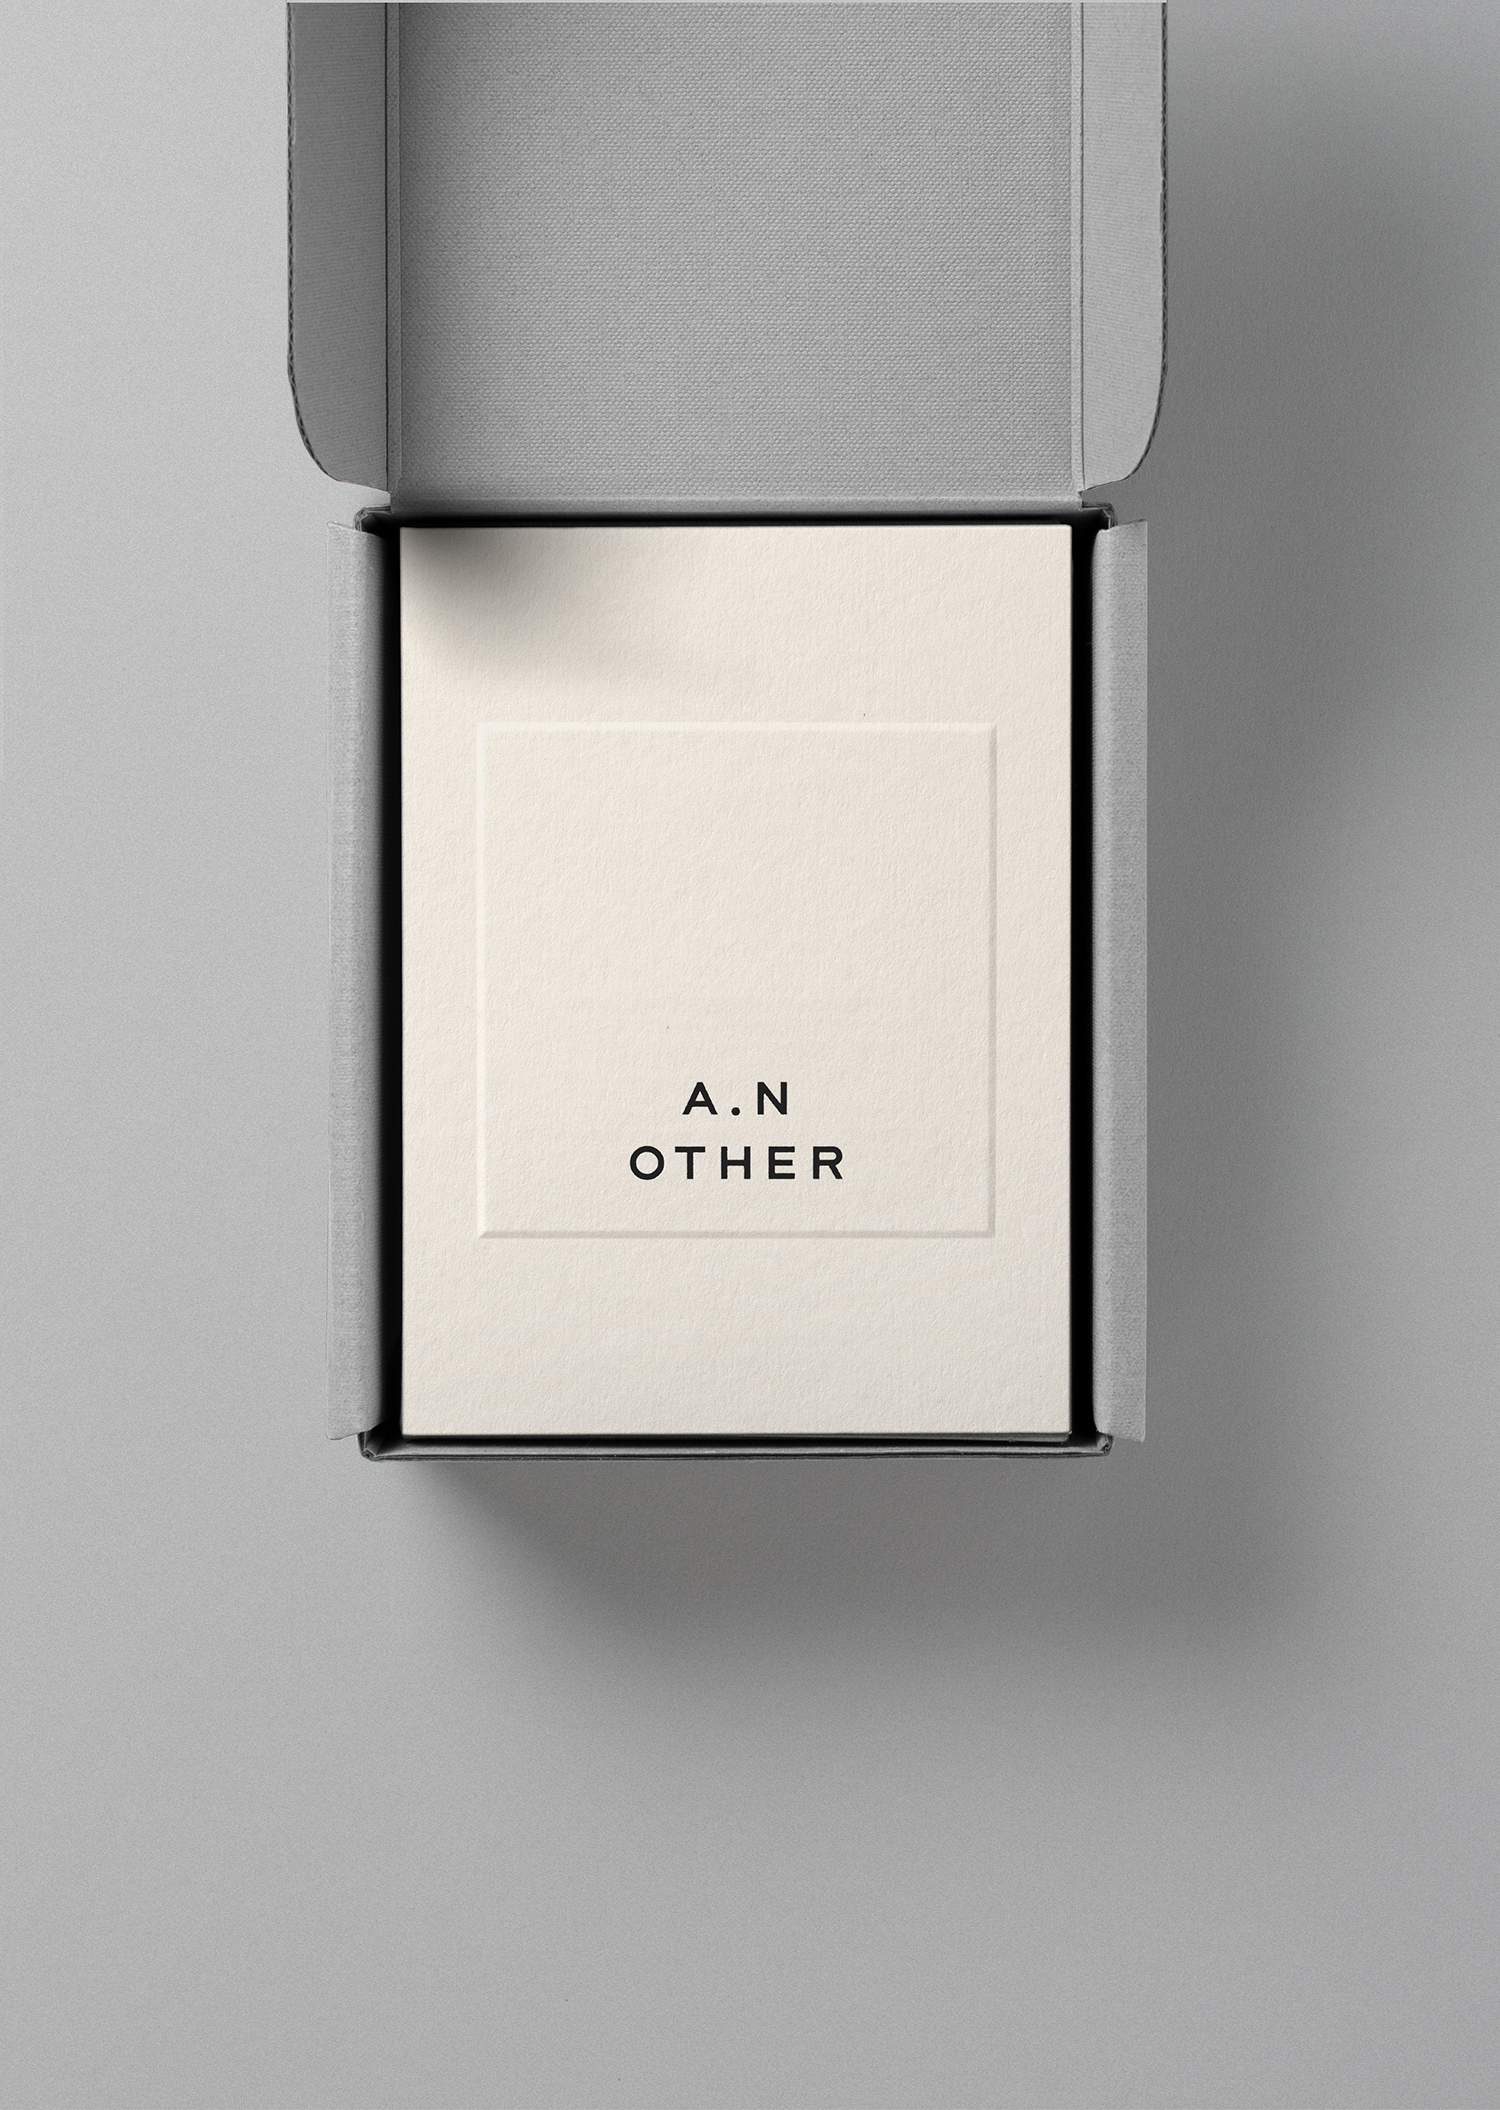 Framing in Branding – A.N Other by Socio Design